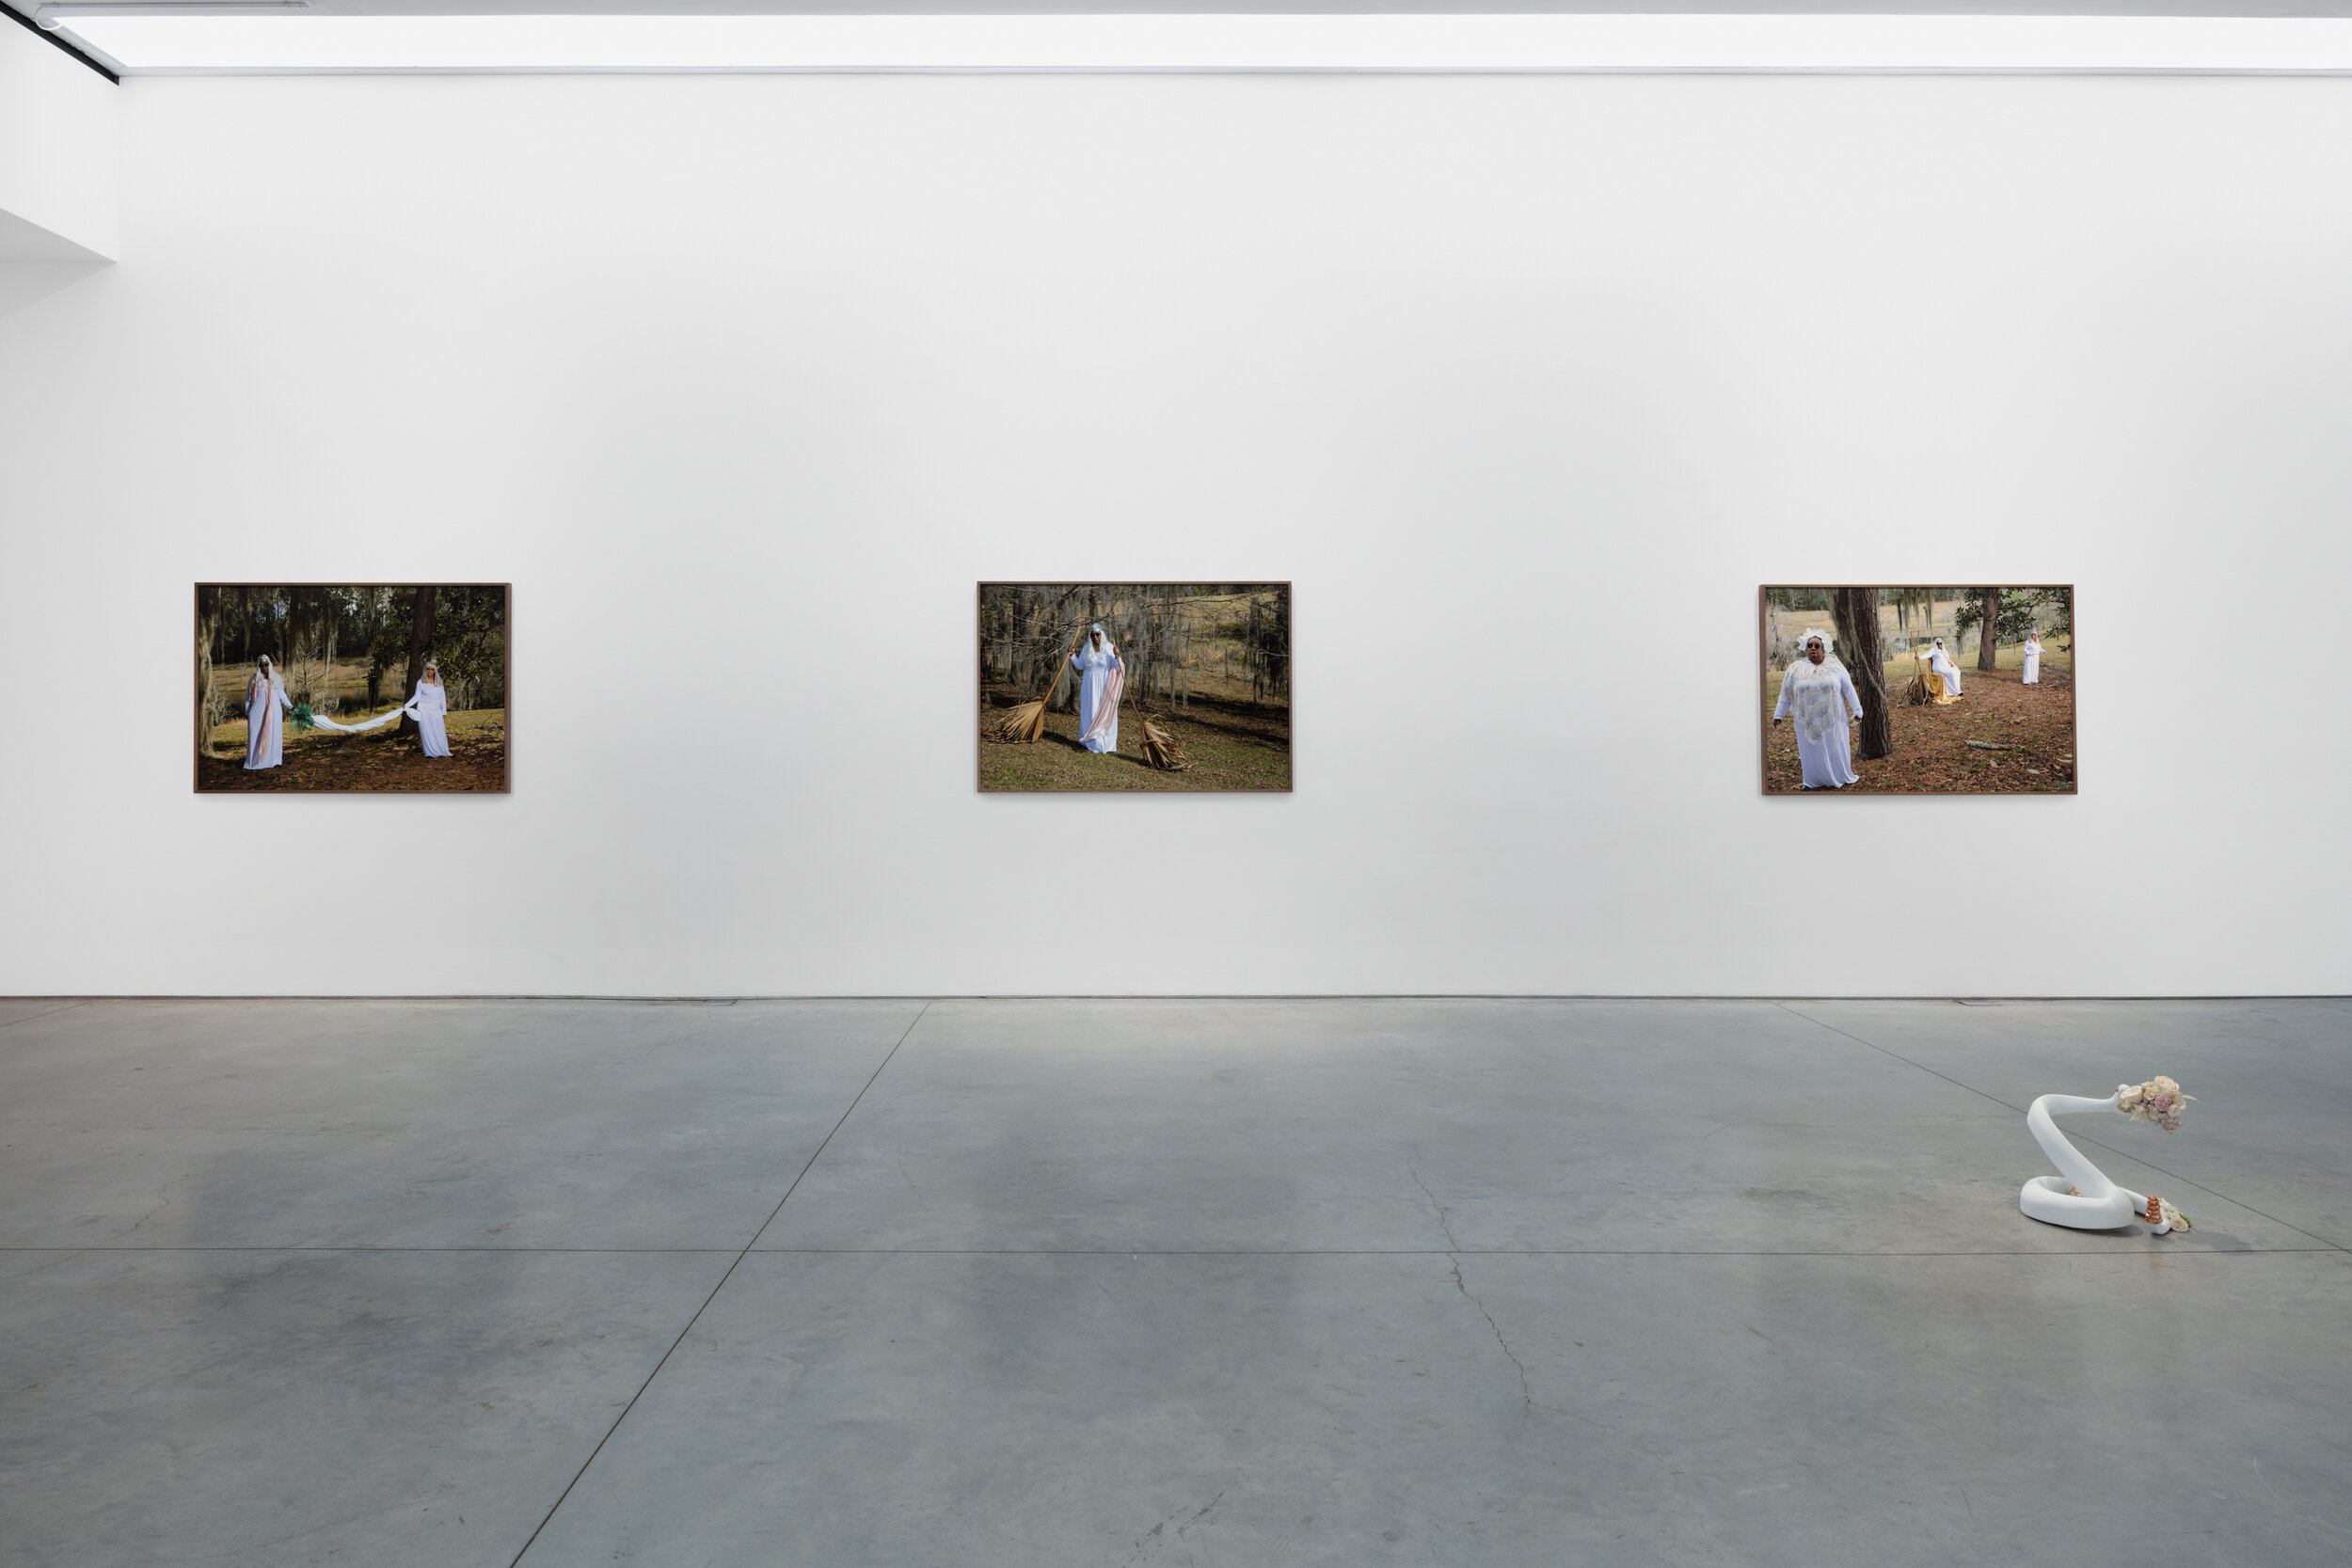  Installation View,  A Romance of Paradise .  On view March 27 – April 24, 2021 at Marianne Boesky Gallery, New York, NY. 